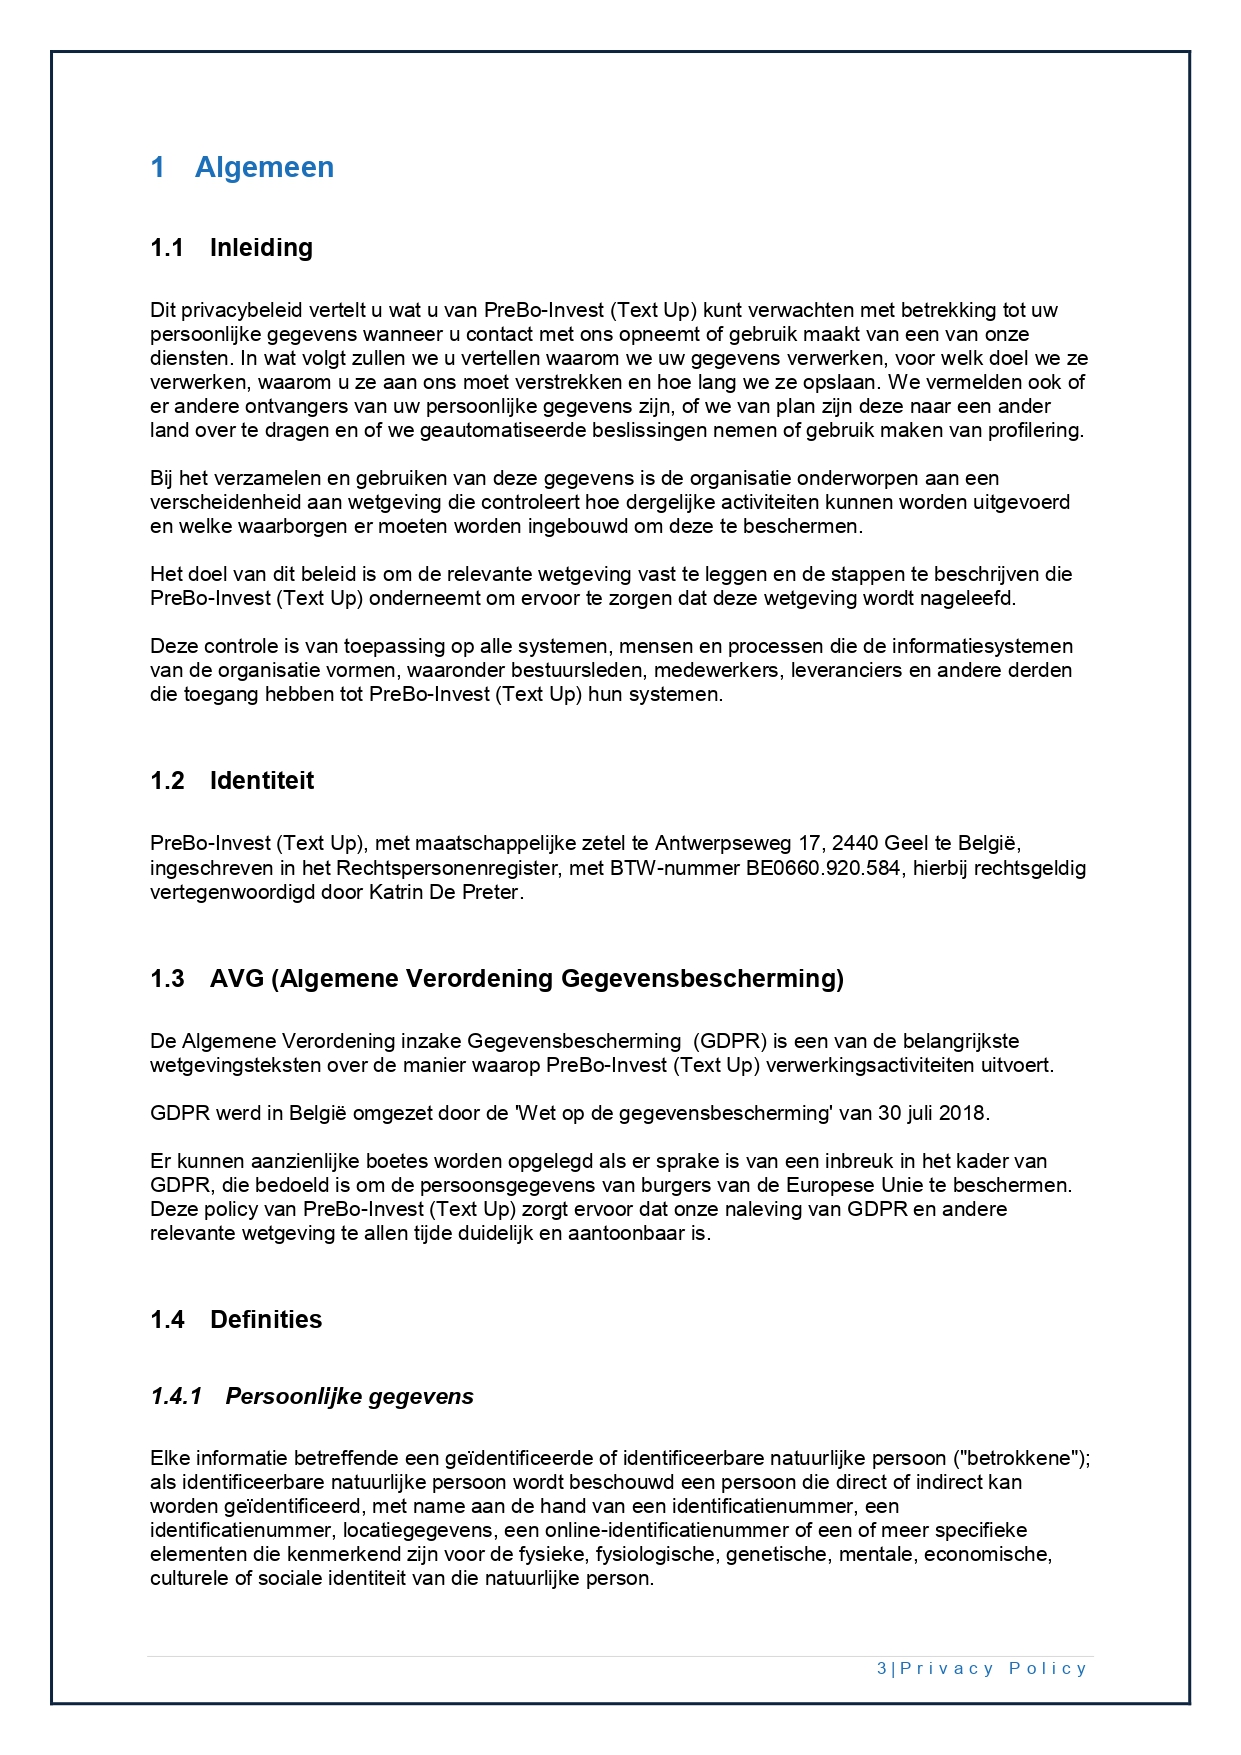 02 Privacy Policy textup.be NL V1.0 page 0003